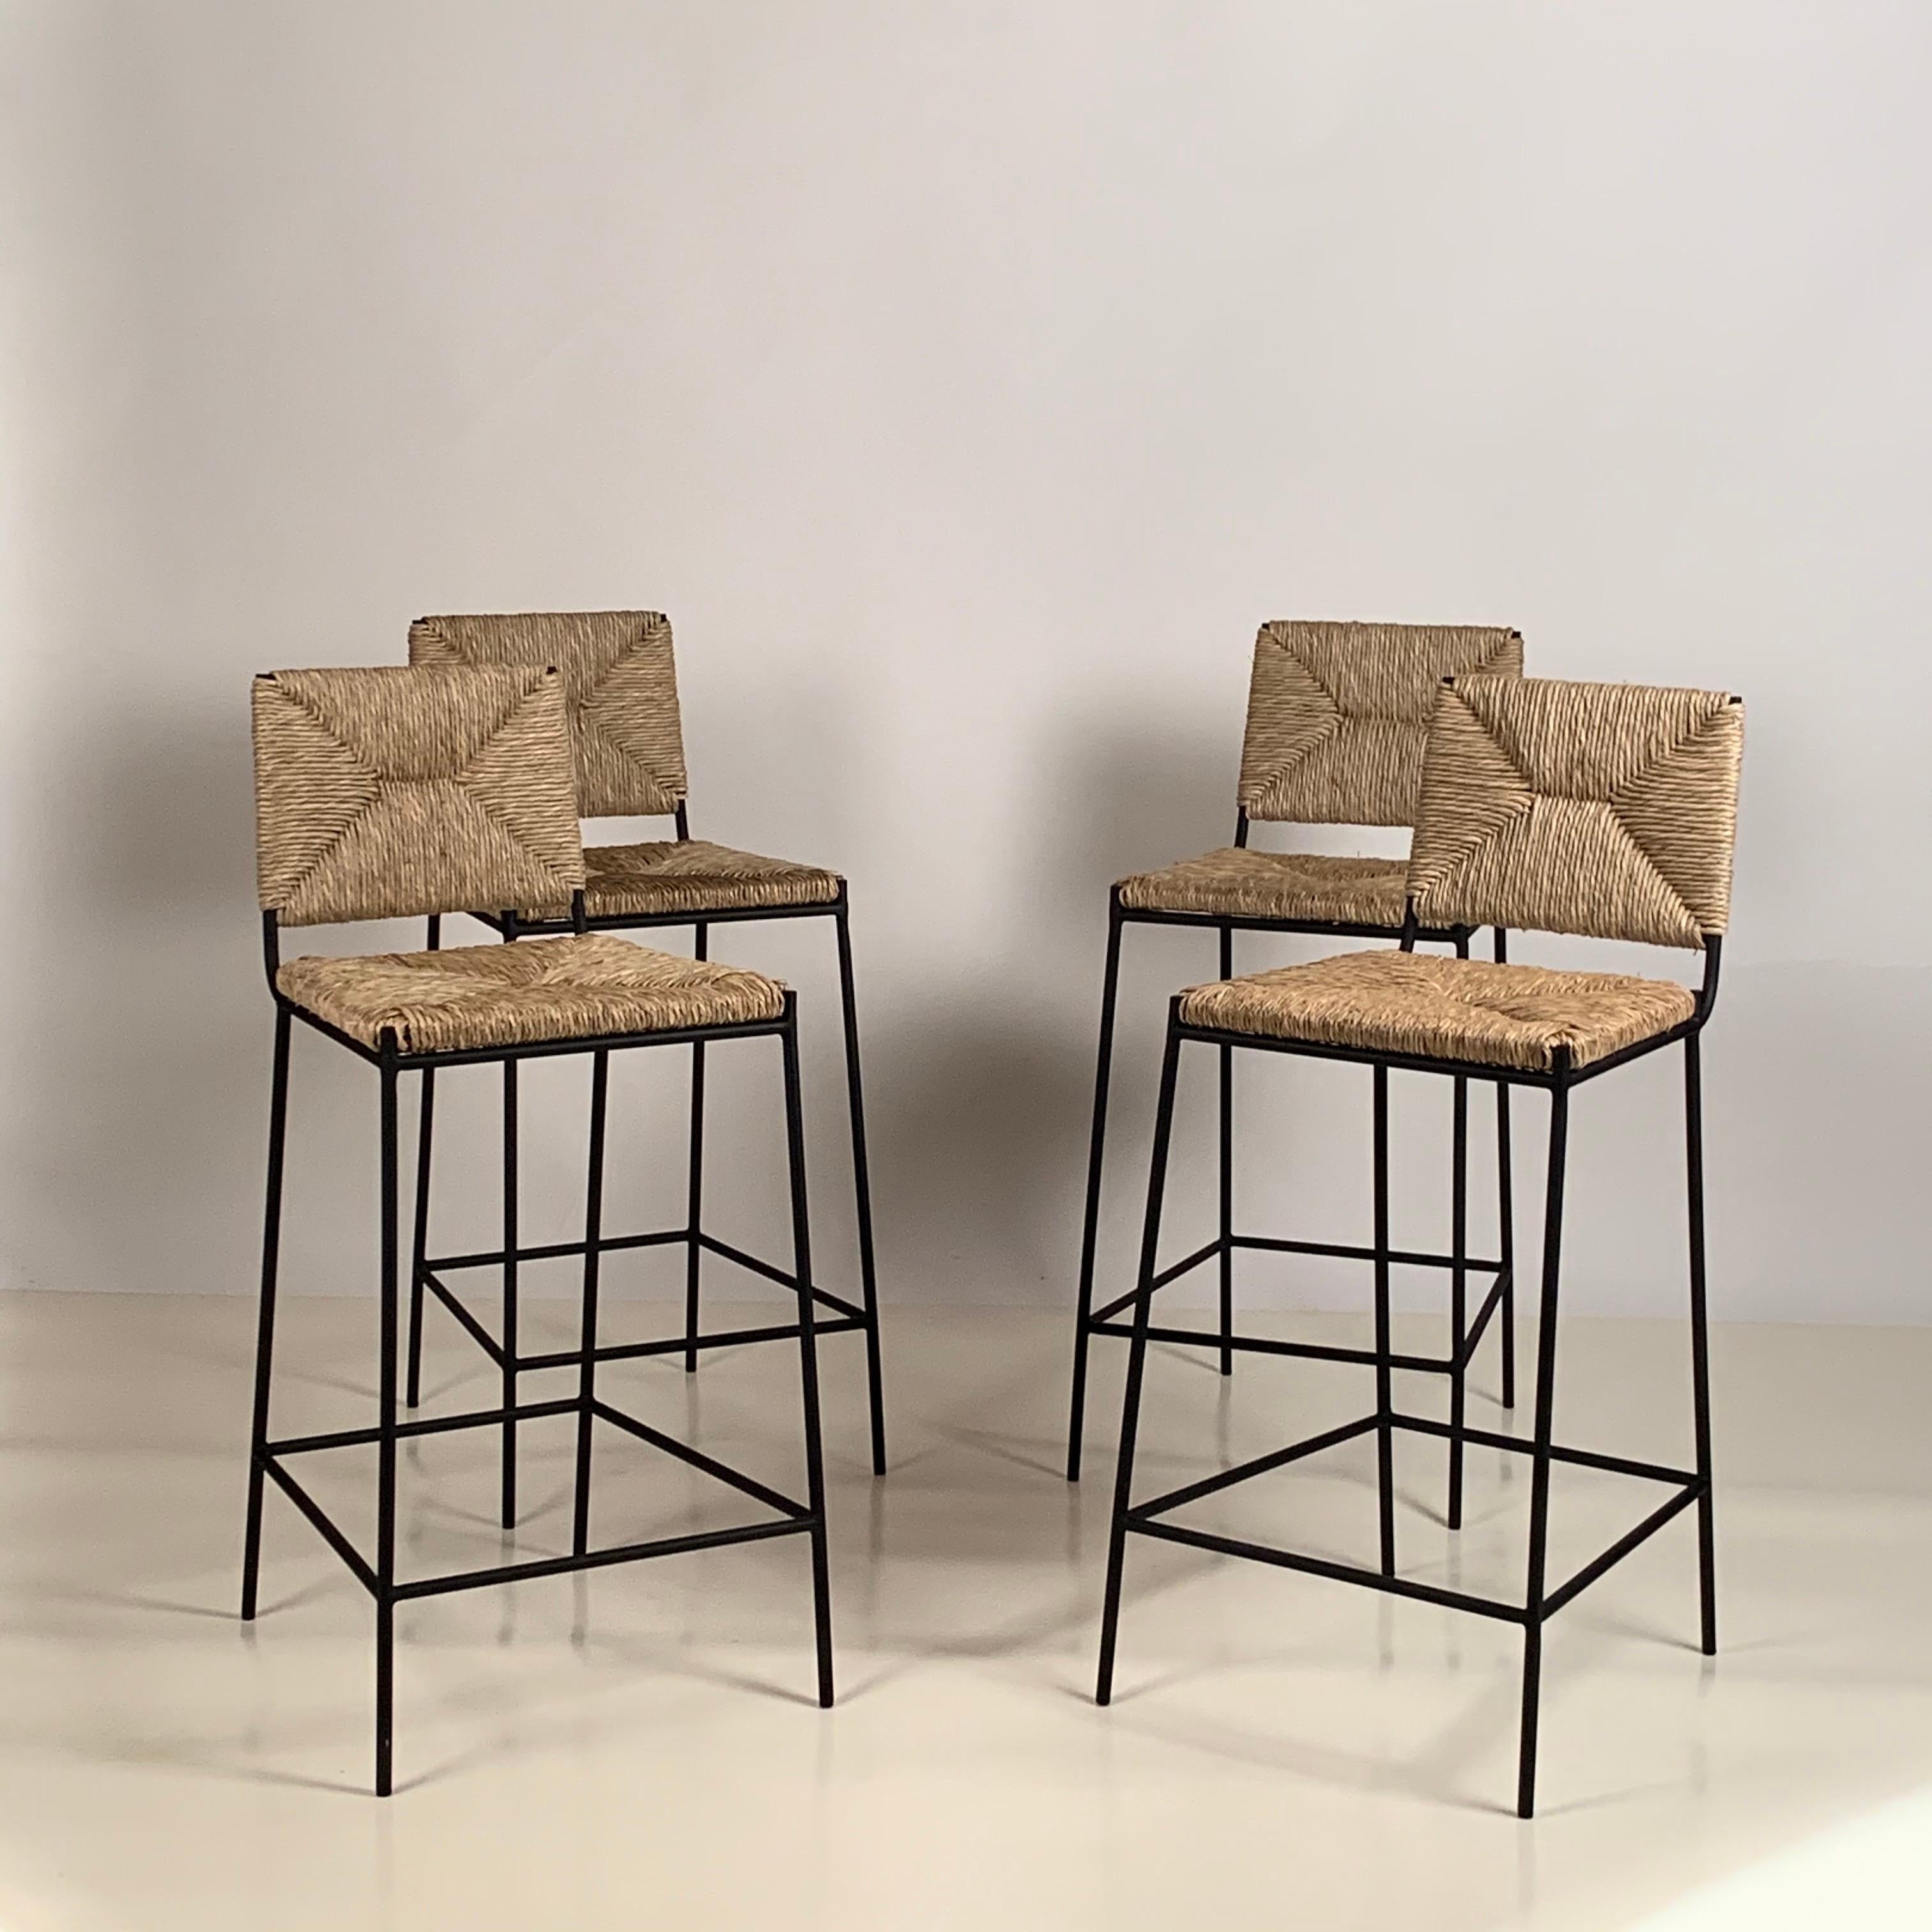 Set of 4 slender 'Campagne' counter stools by Design Frères.

Comfortable, with a minimal footprint.

Extra support under the rush seat.

Feet pads to protect flooring.